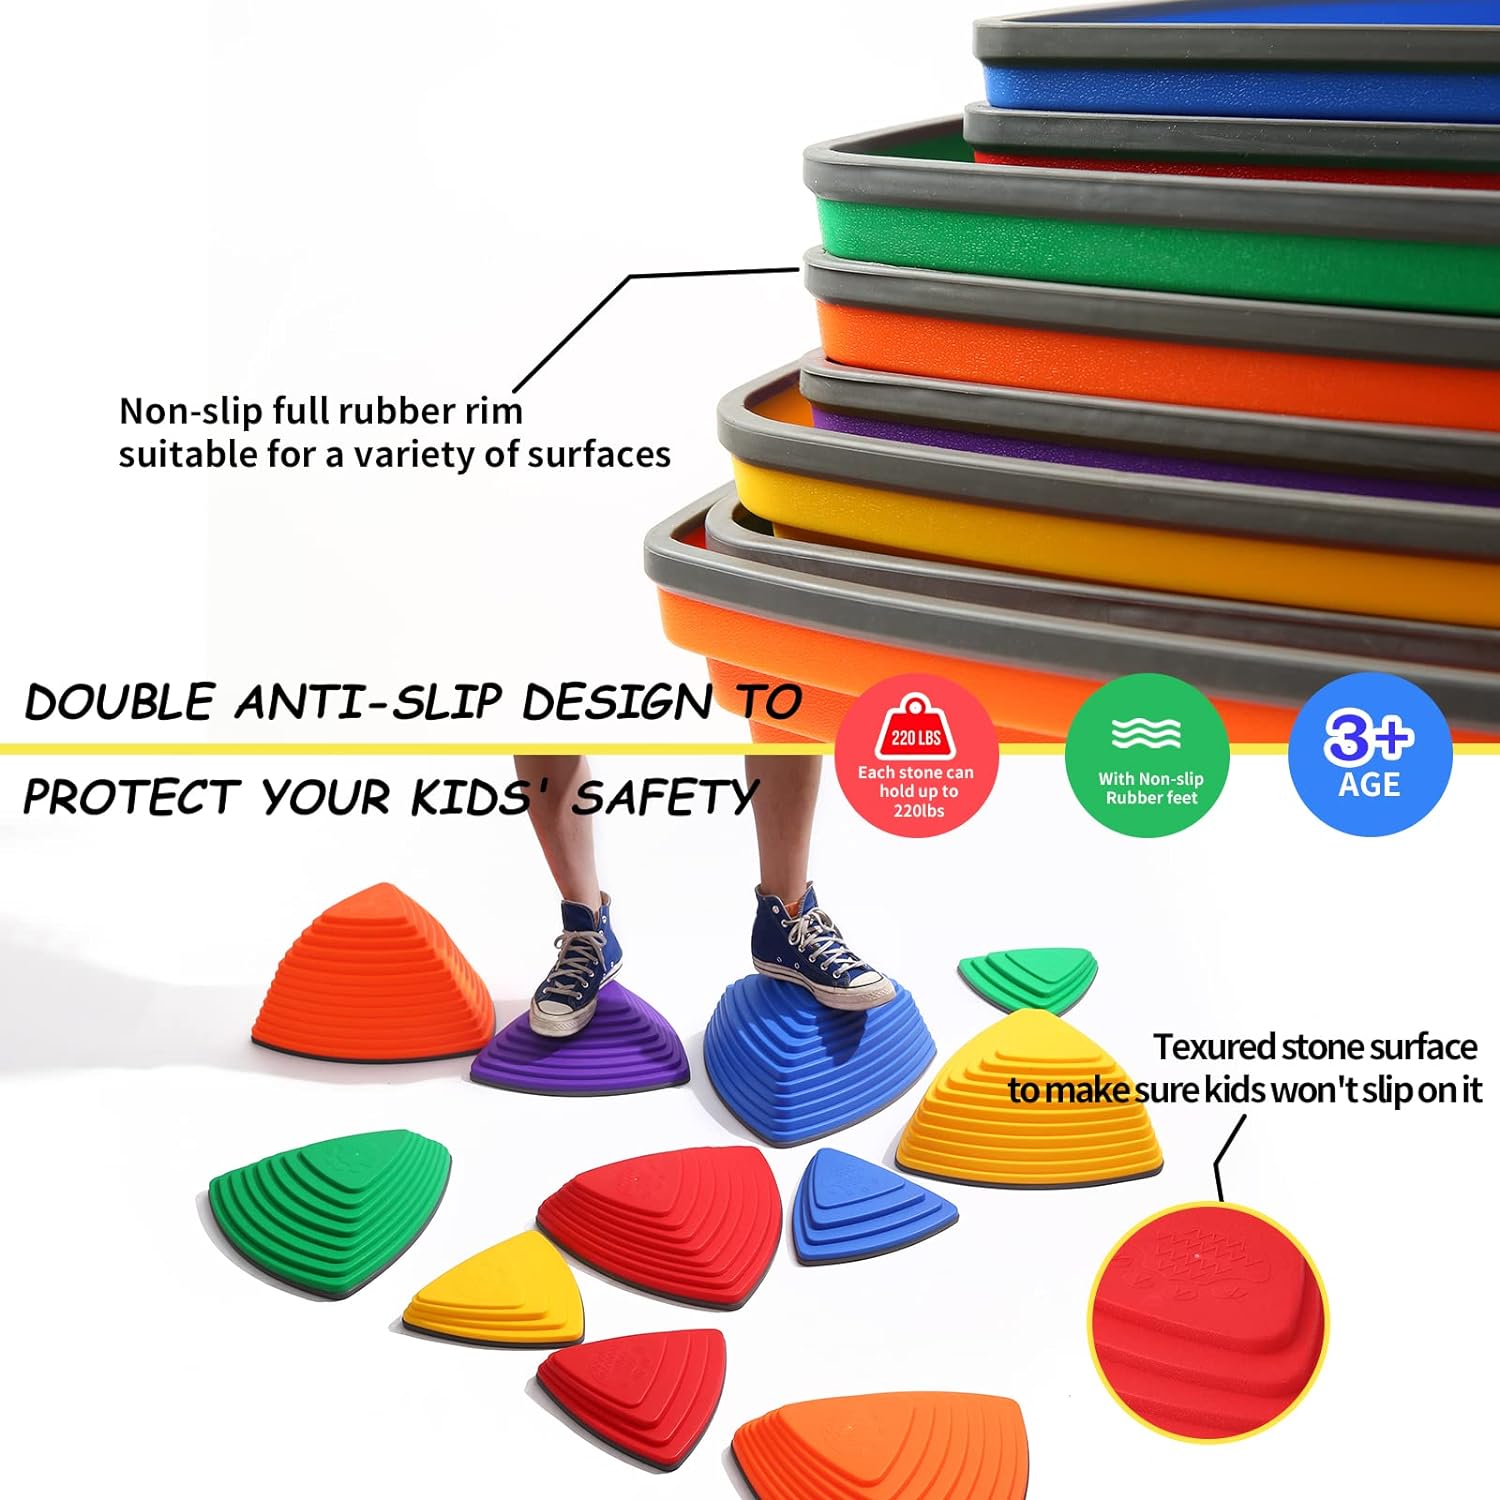 makarci Stepping Stones for Kids 12pcs Obstacle Courses Play Indoor Outdoor, Full Rubber Rim Plastic Hilltop for Kids Balance and Integration Improvement Age 3 4 5 6 7 8 + (Forest)